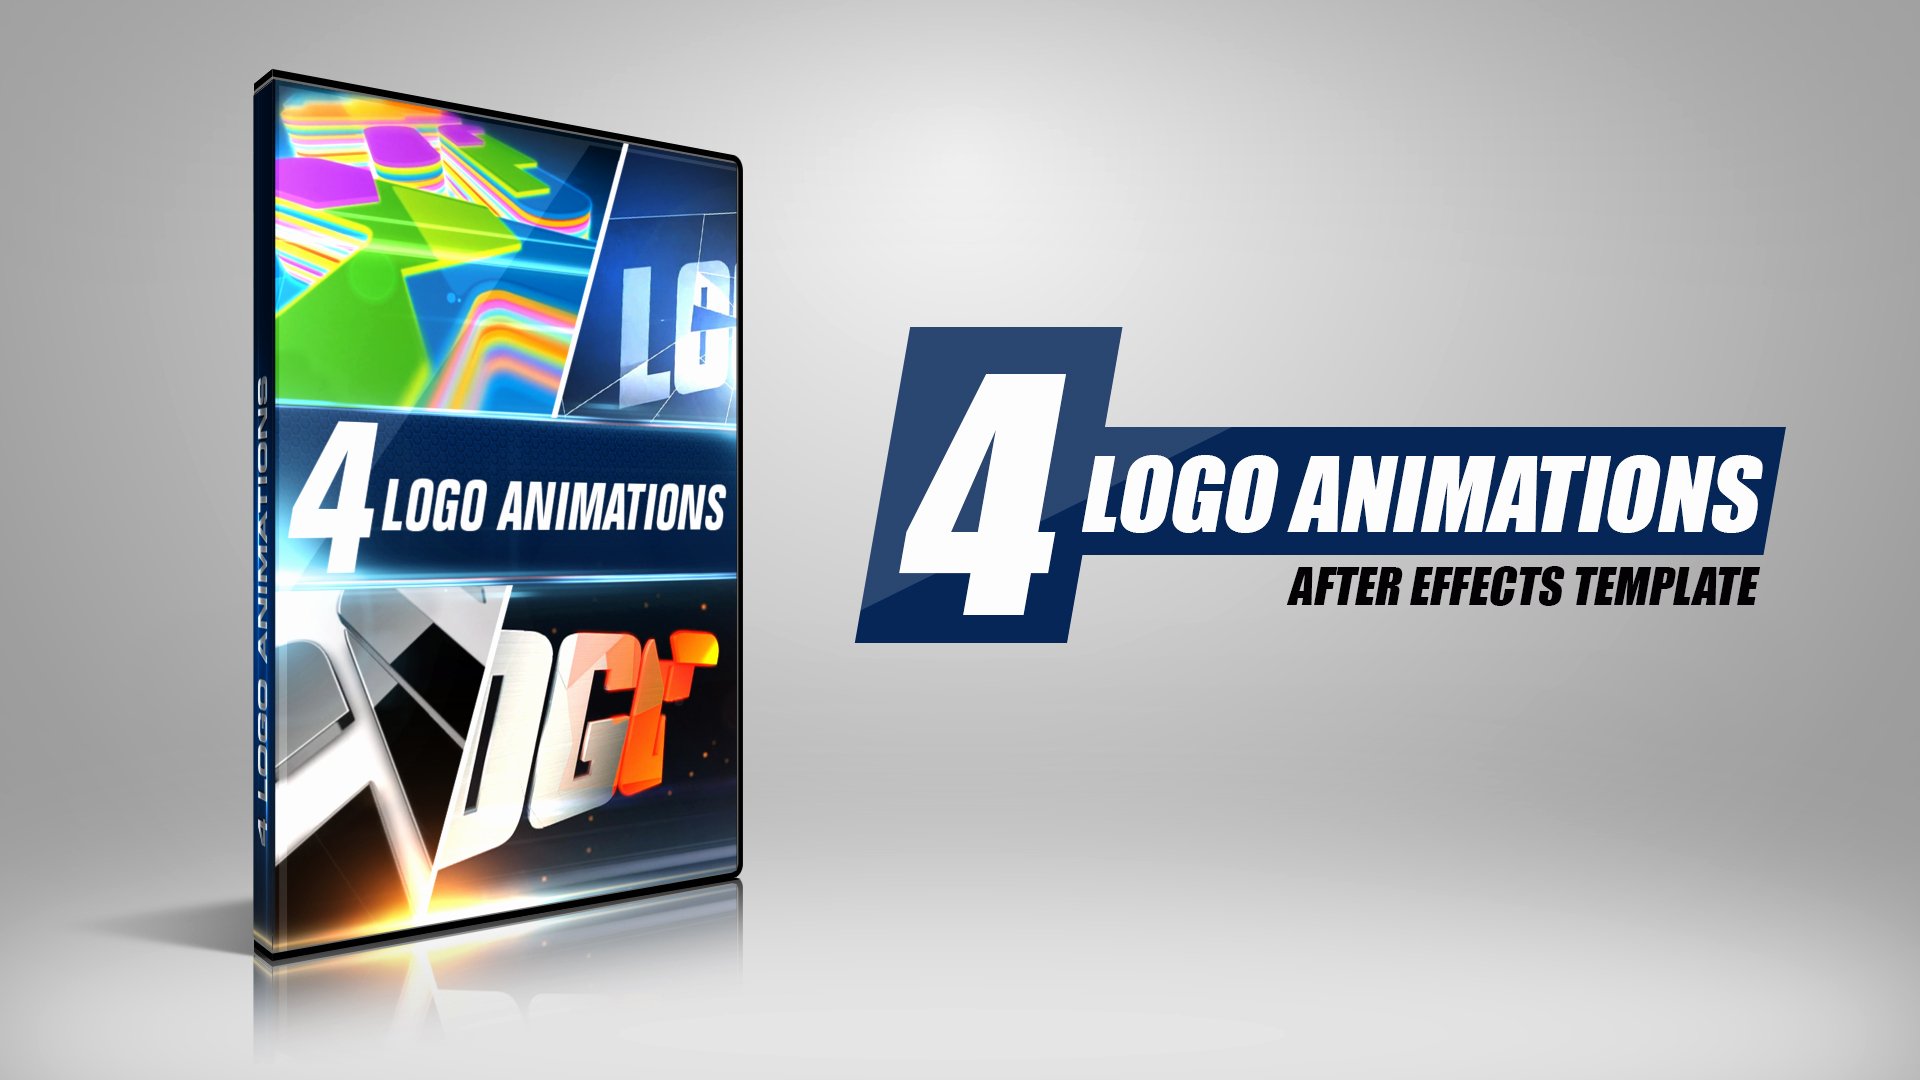 After Effects Template 4 Logo